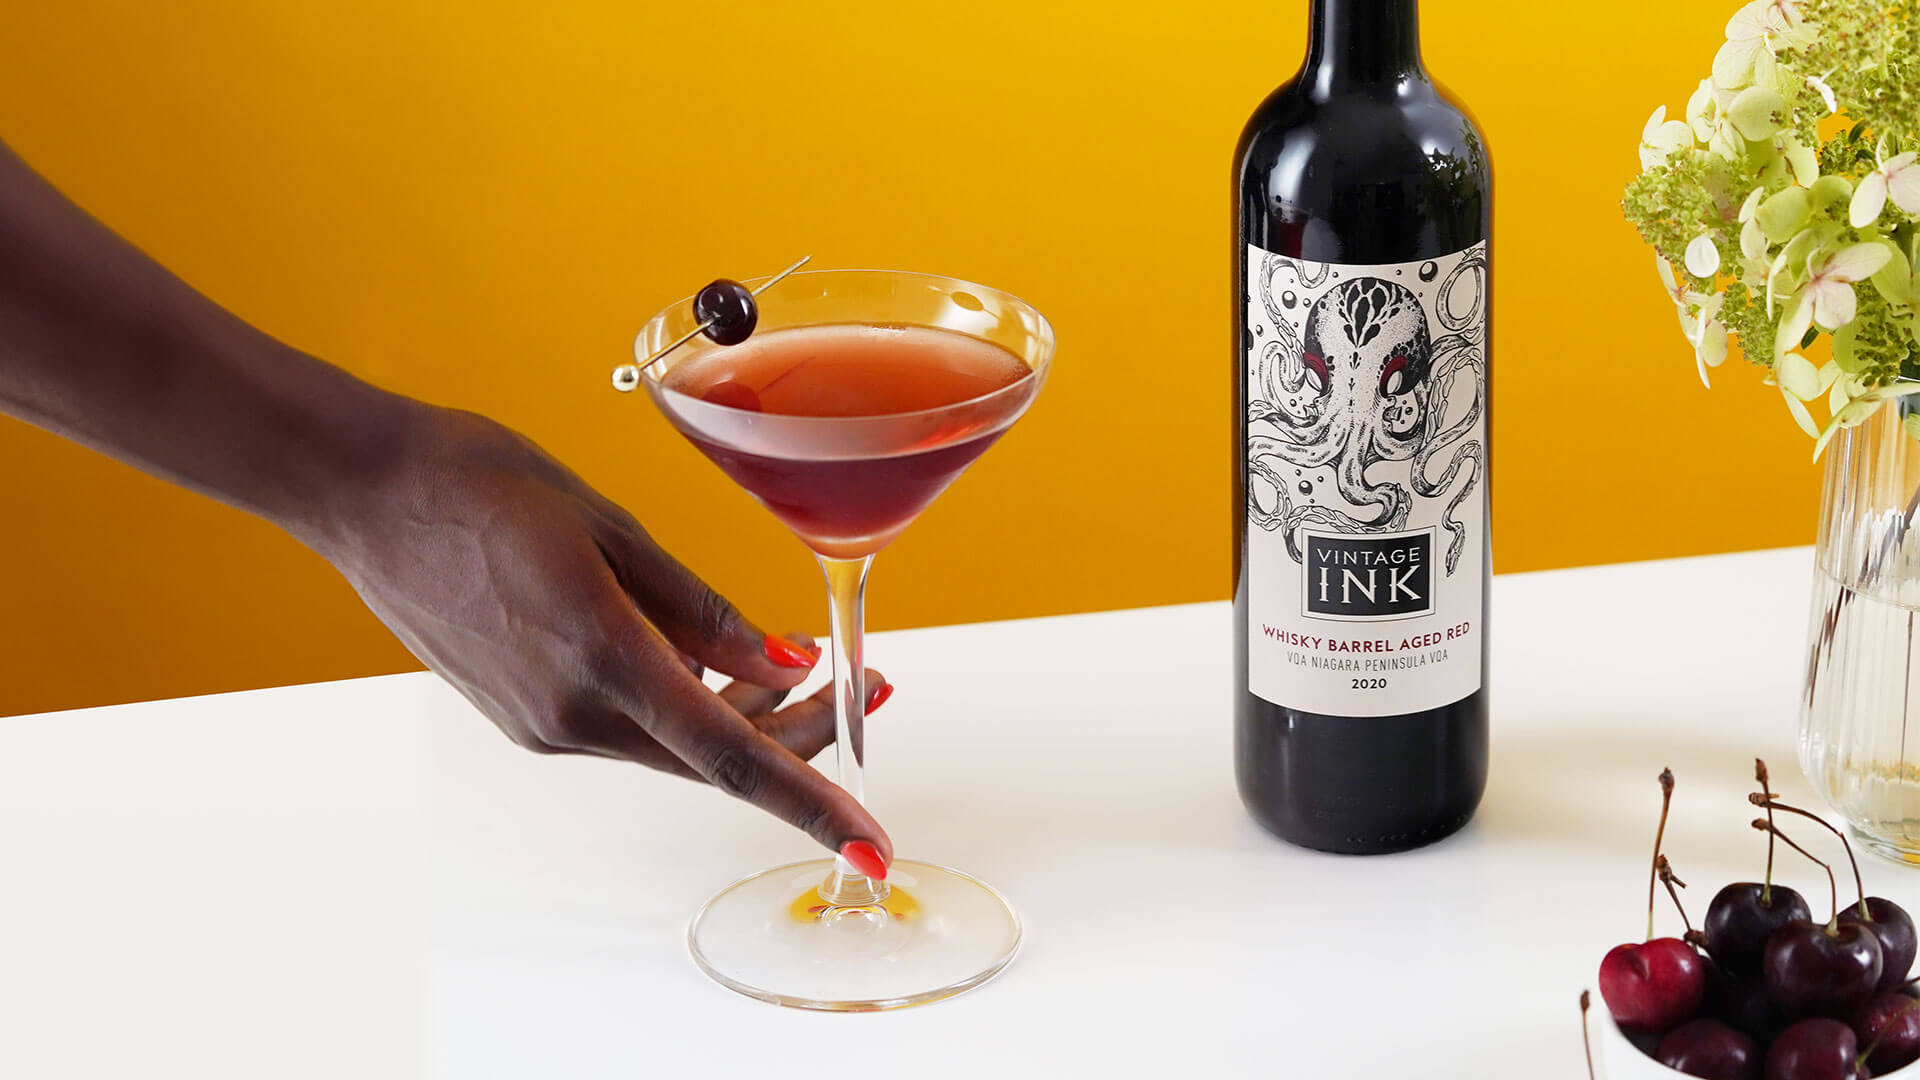 Wine and Cocktail lover showcasing the Vintage Ink Manhattan using Vintage Ink Whiskey Barrel Aged Red Wine.